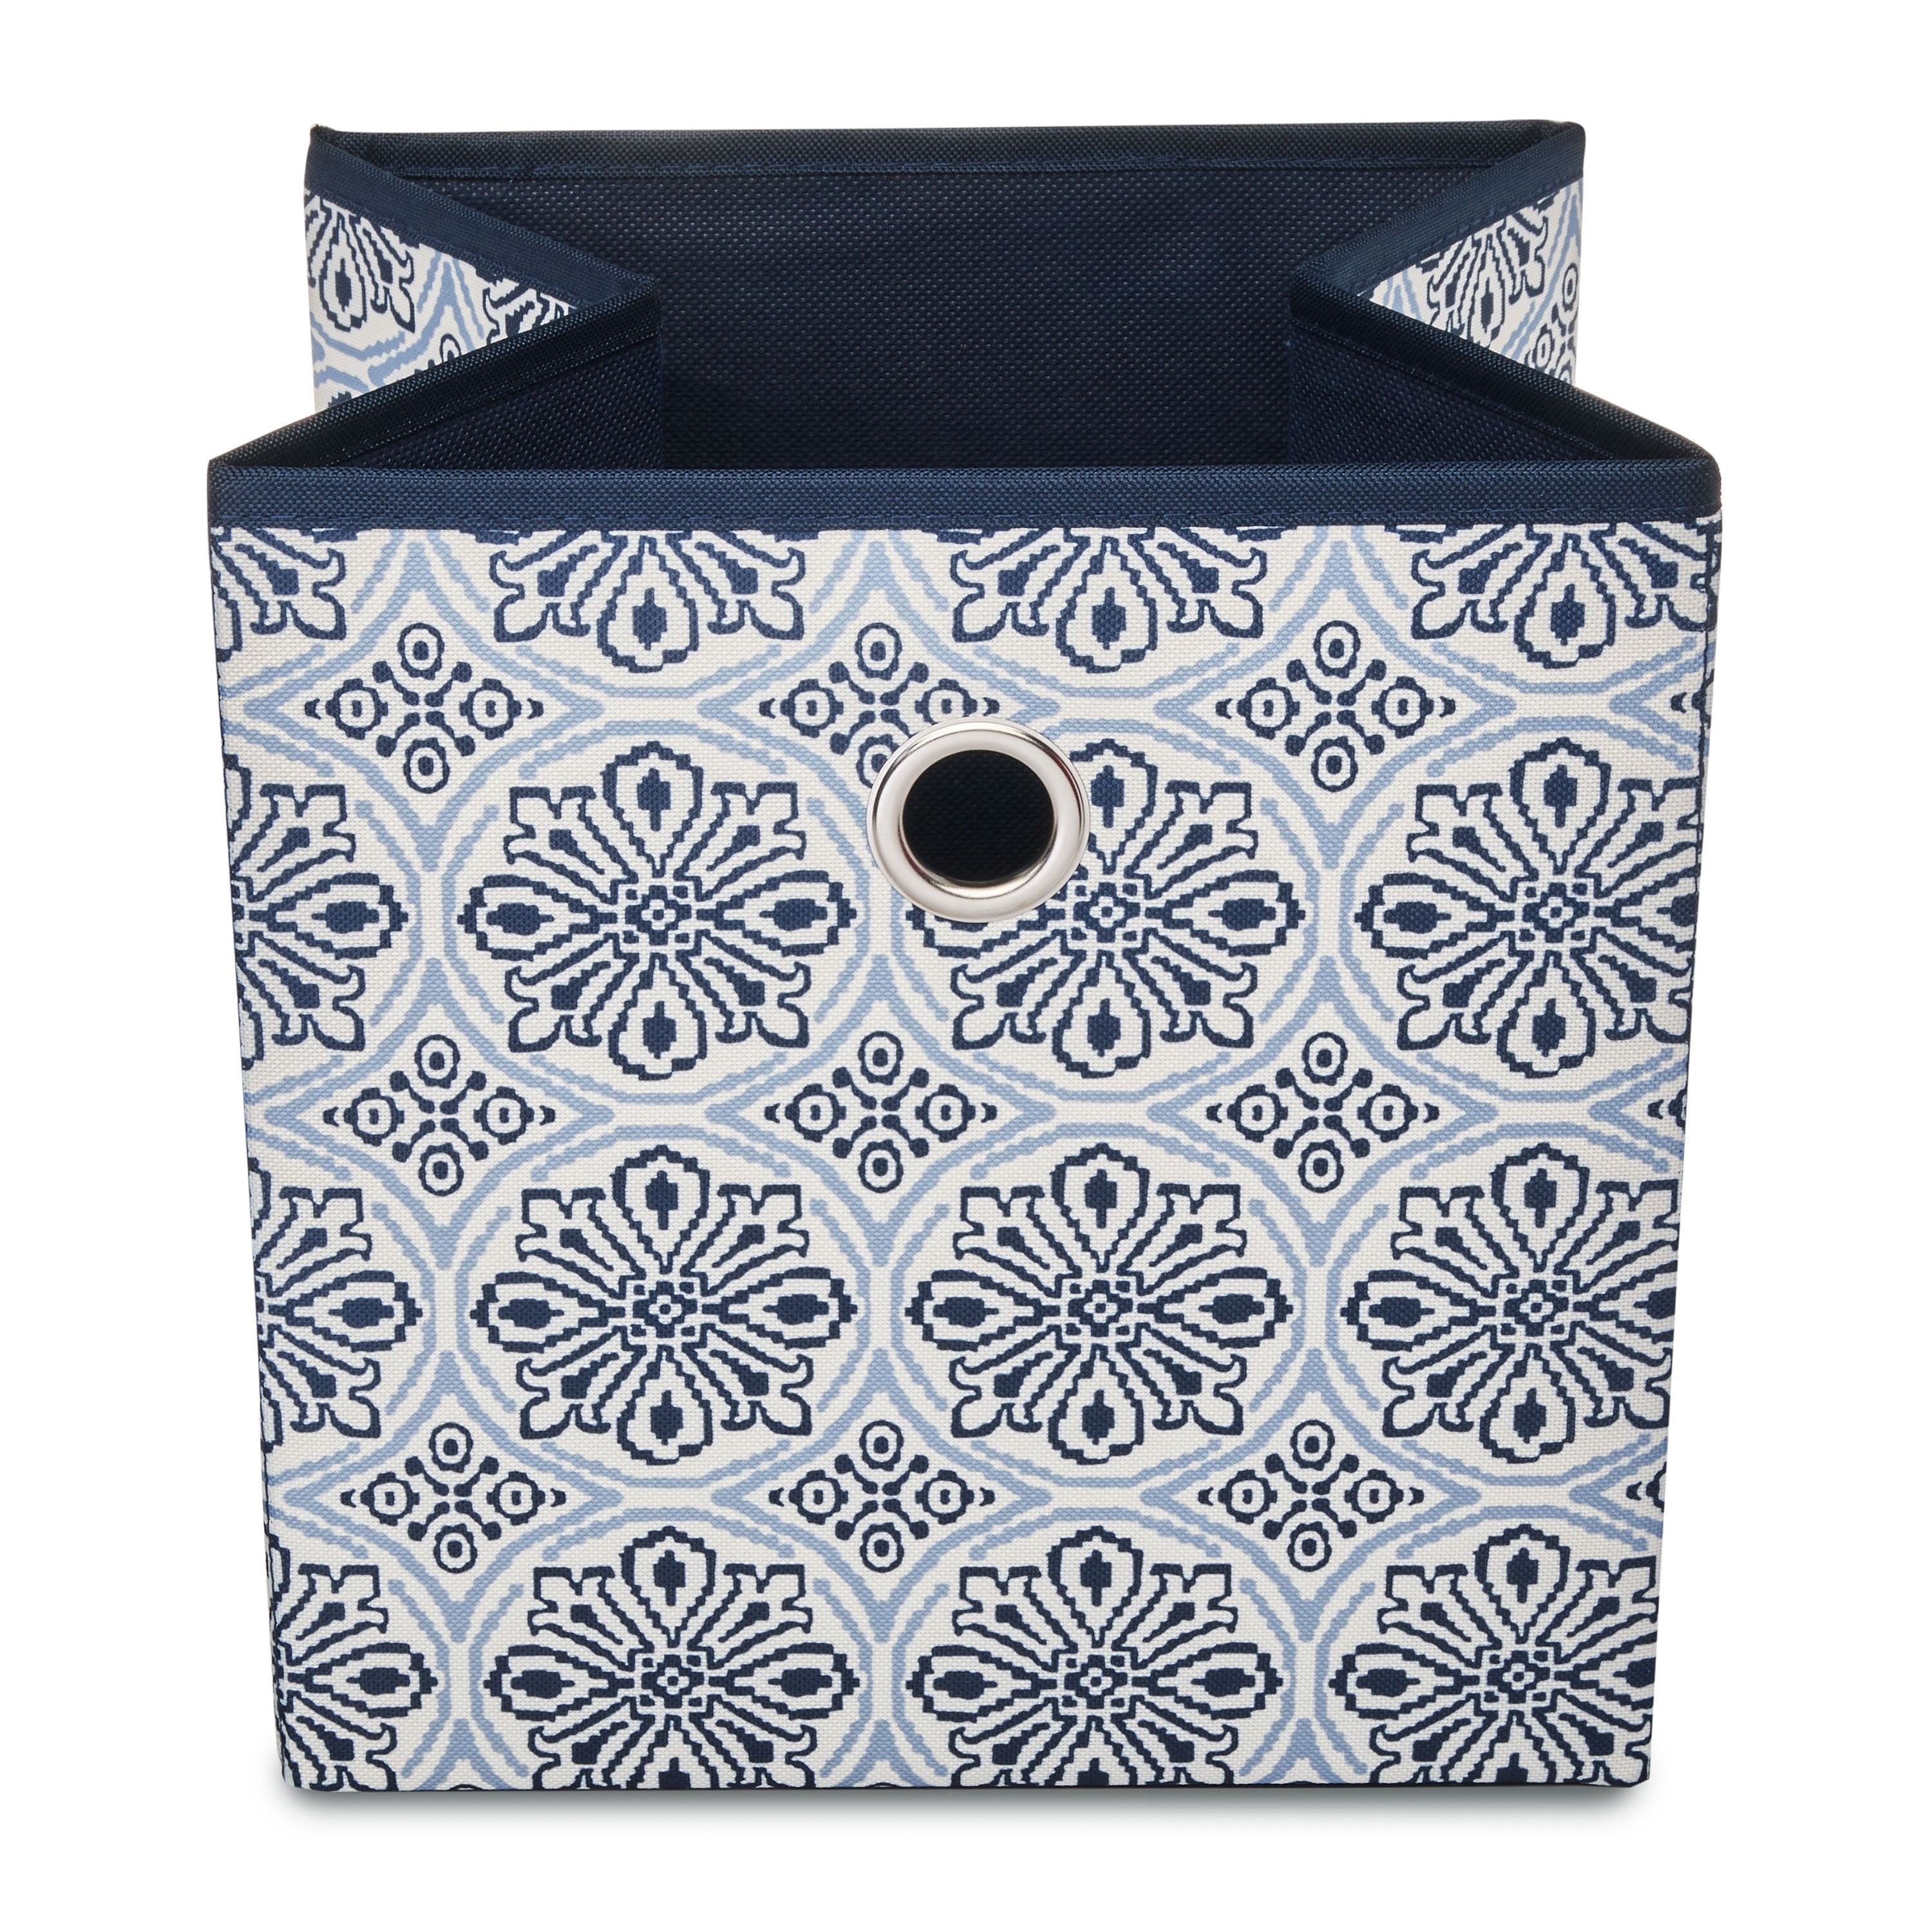 Maple and Jade Fabric Storage Trunk in Blue (Set of 3)